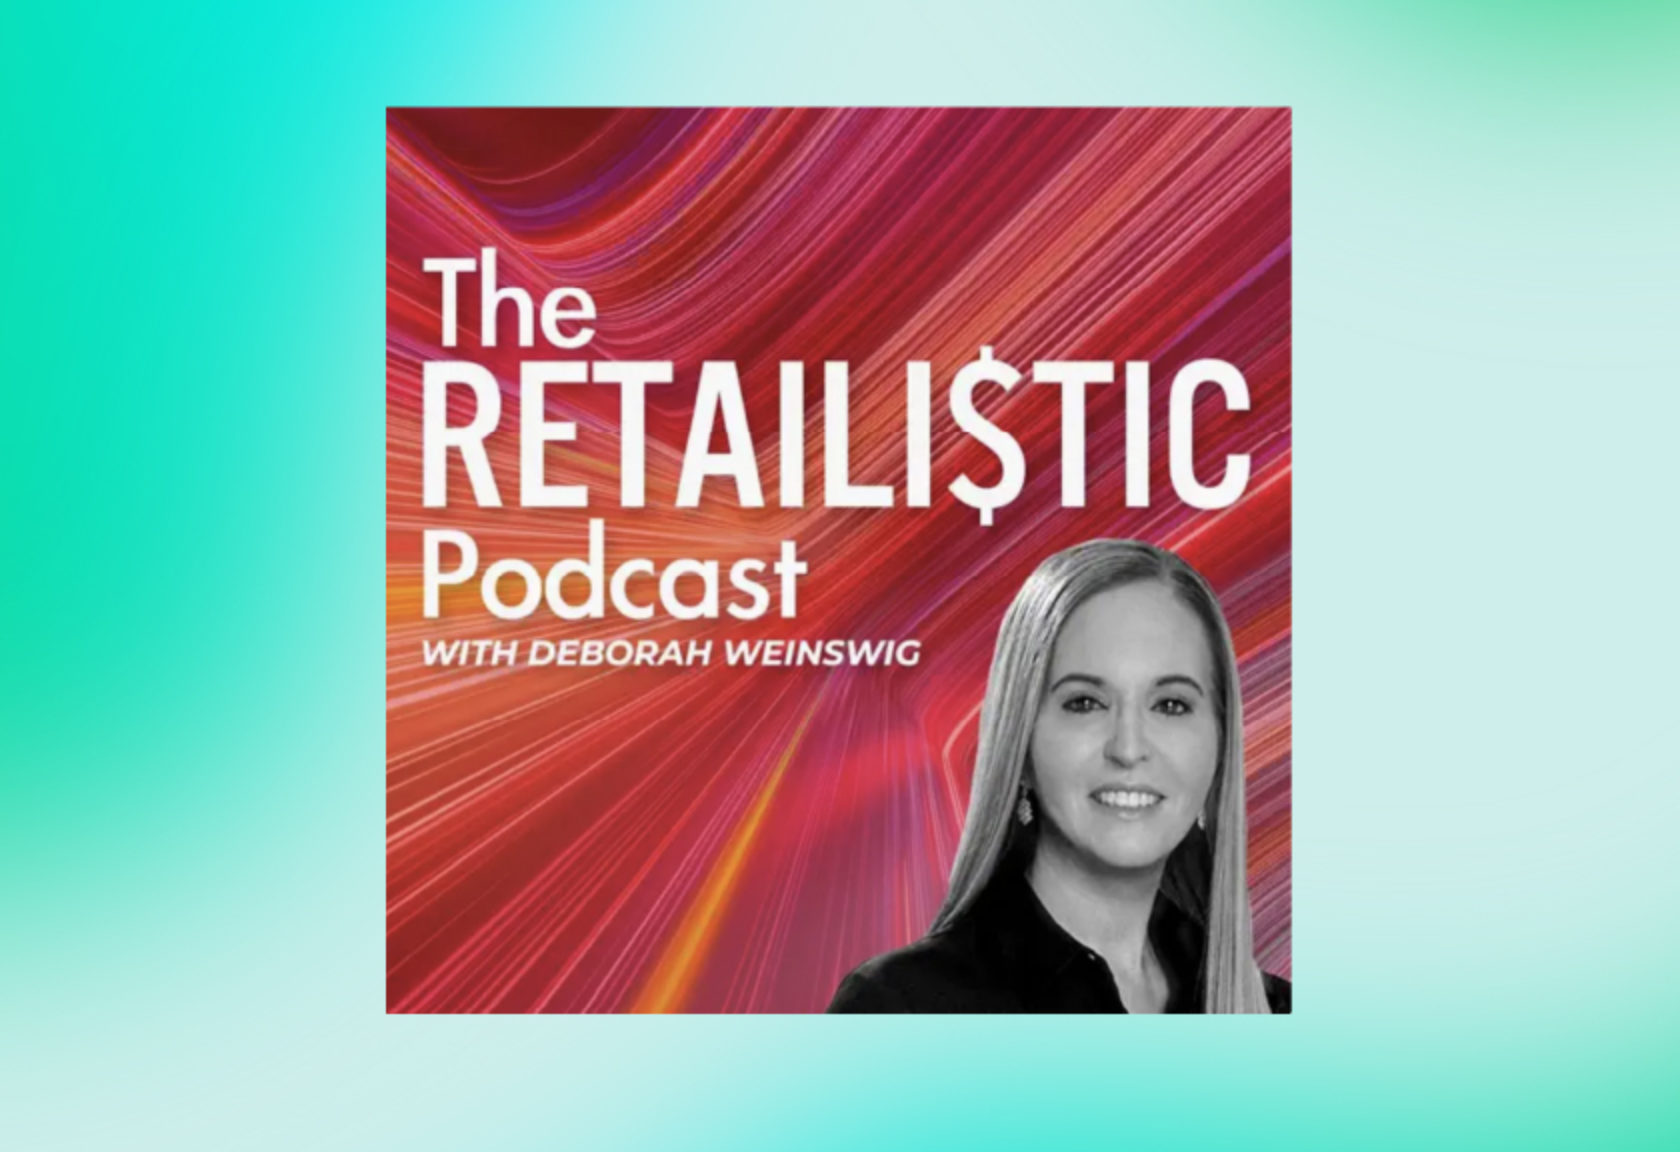 The Retailistic Podcast: Sustainability and Special Guest Steve Statler